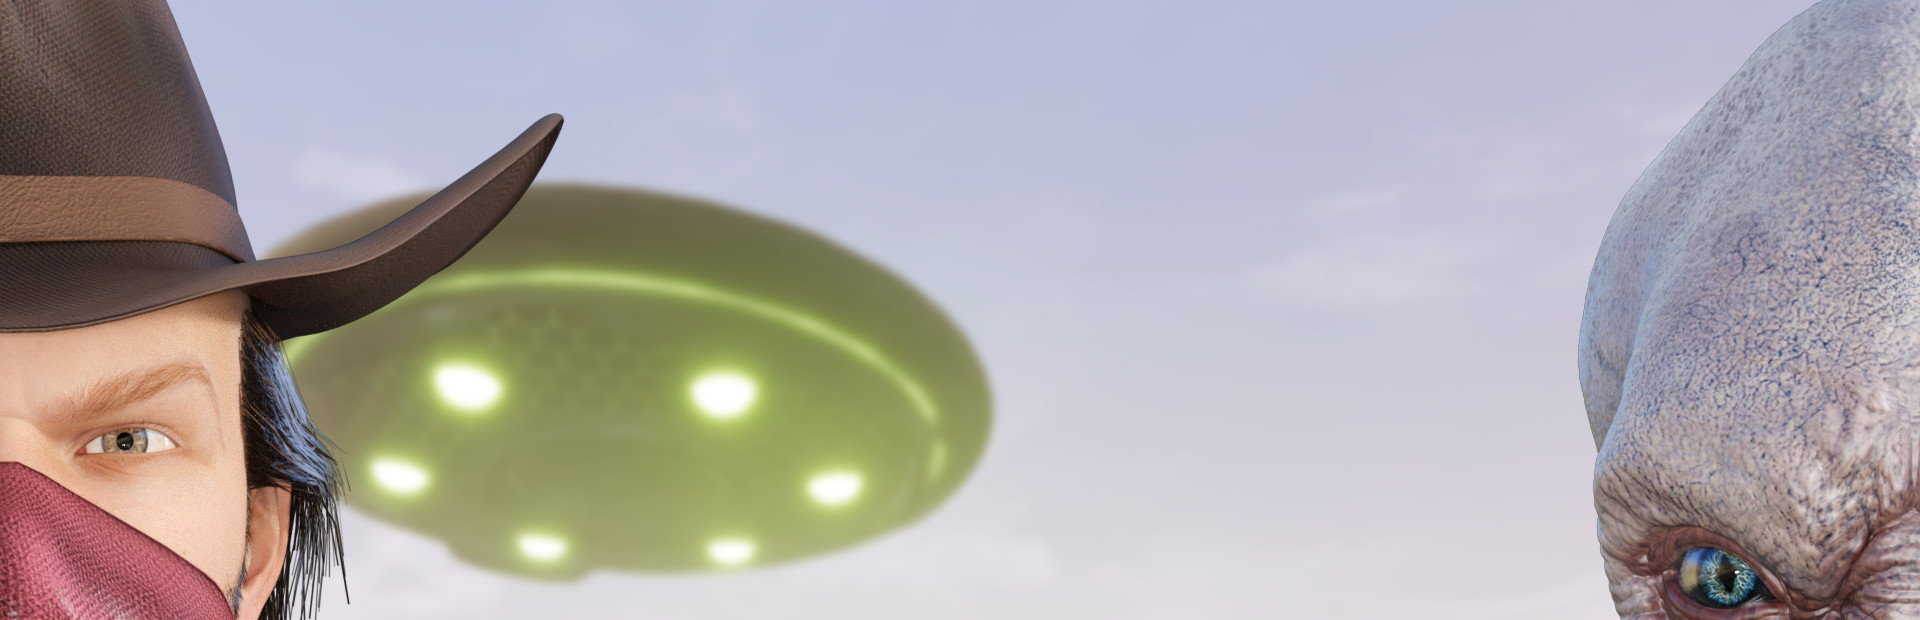 ALIENS INVADED OUR PLANET cover image